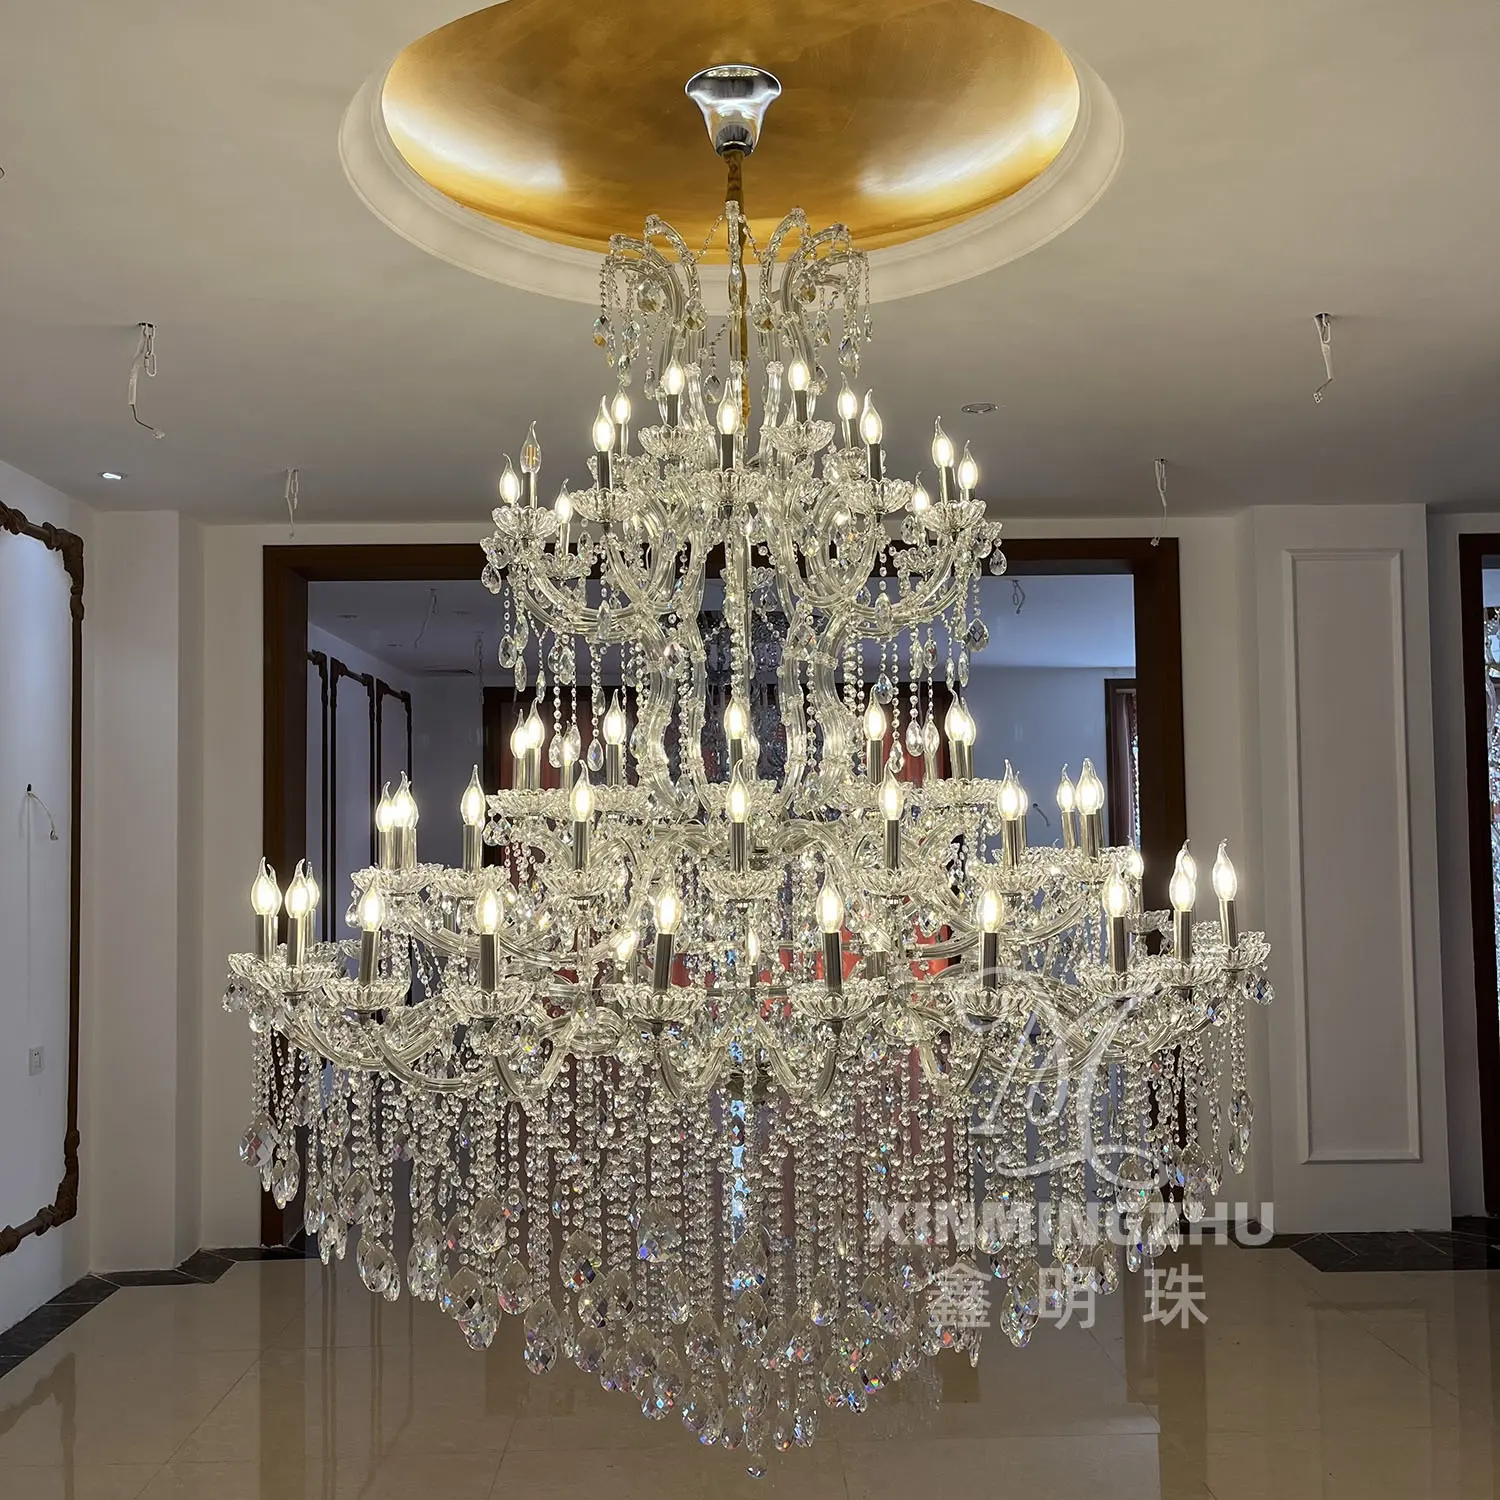 custom large classical luxury Maria Theresa crystal candle chandelier pendant light fixture for living room decorative lighting